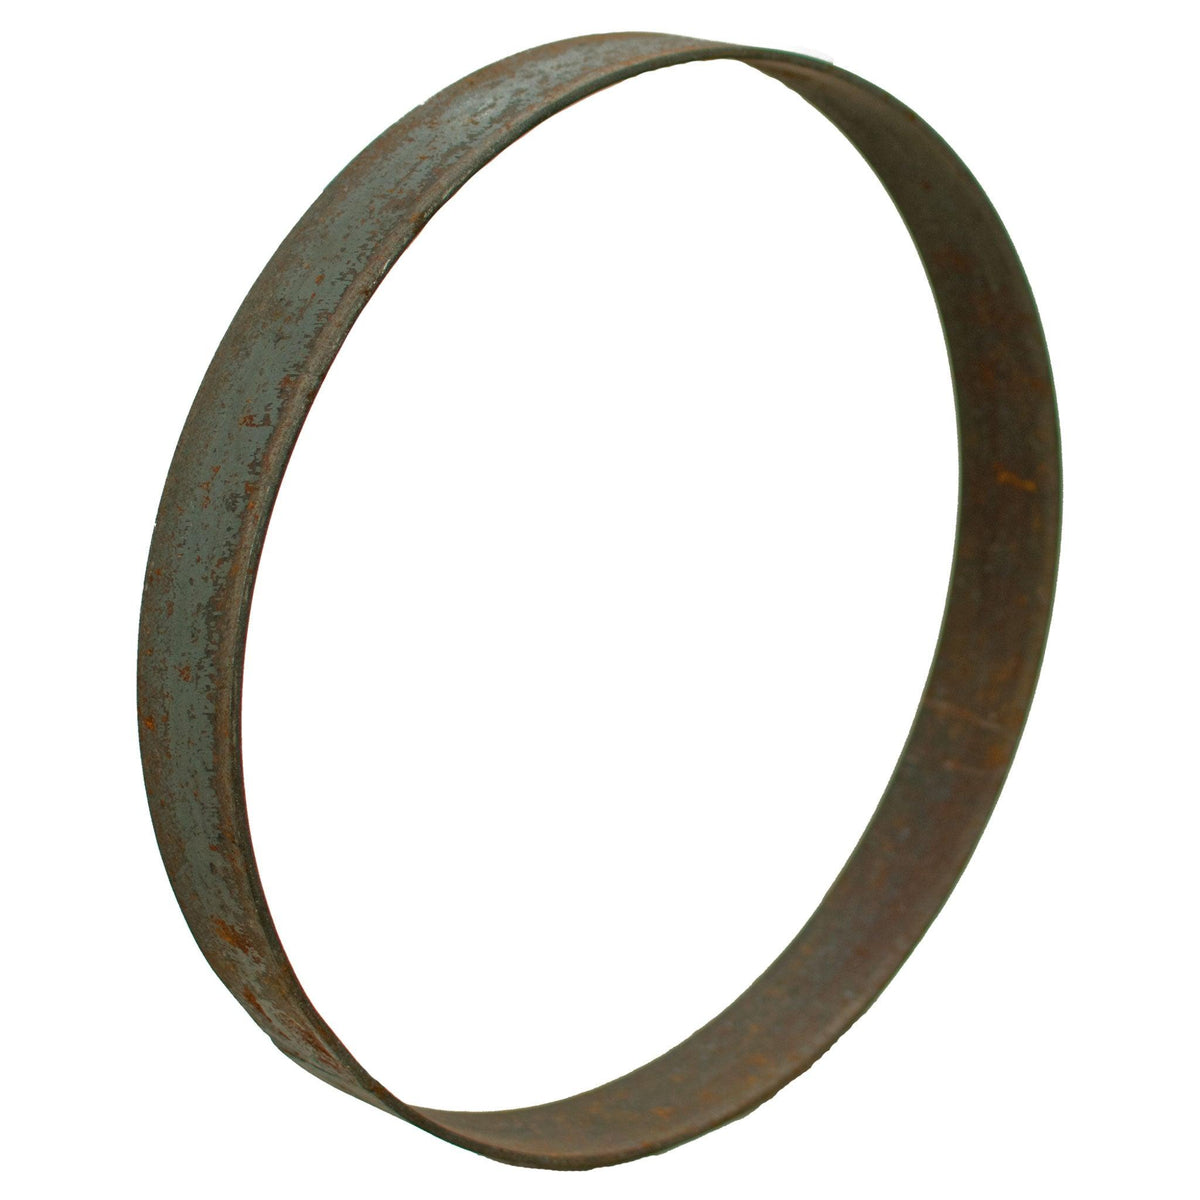 Steel Rings on Sale Shop Custom Sizes and Dimensions at Lee